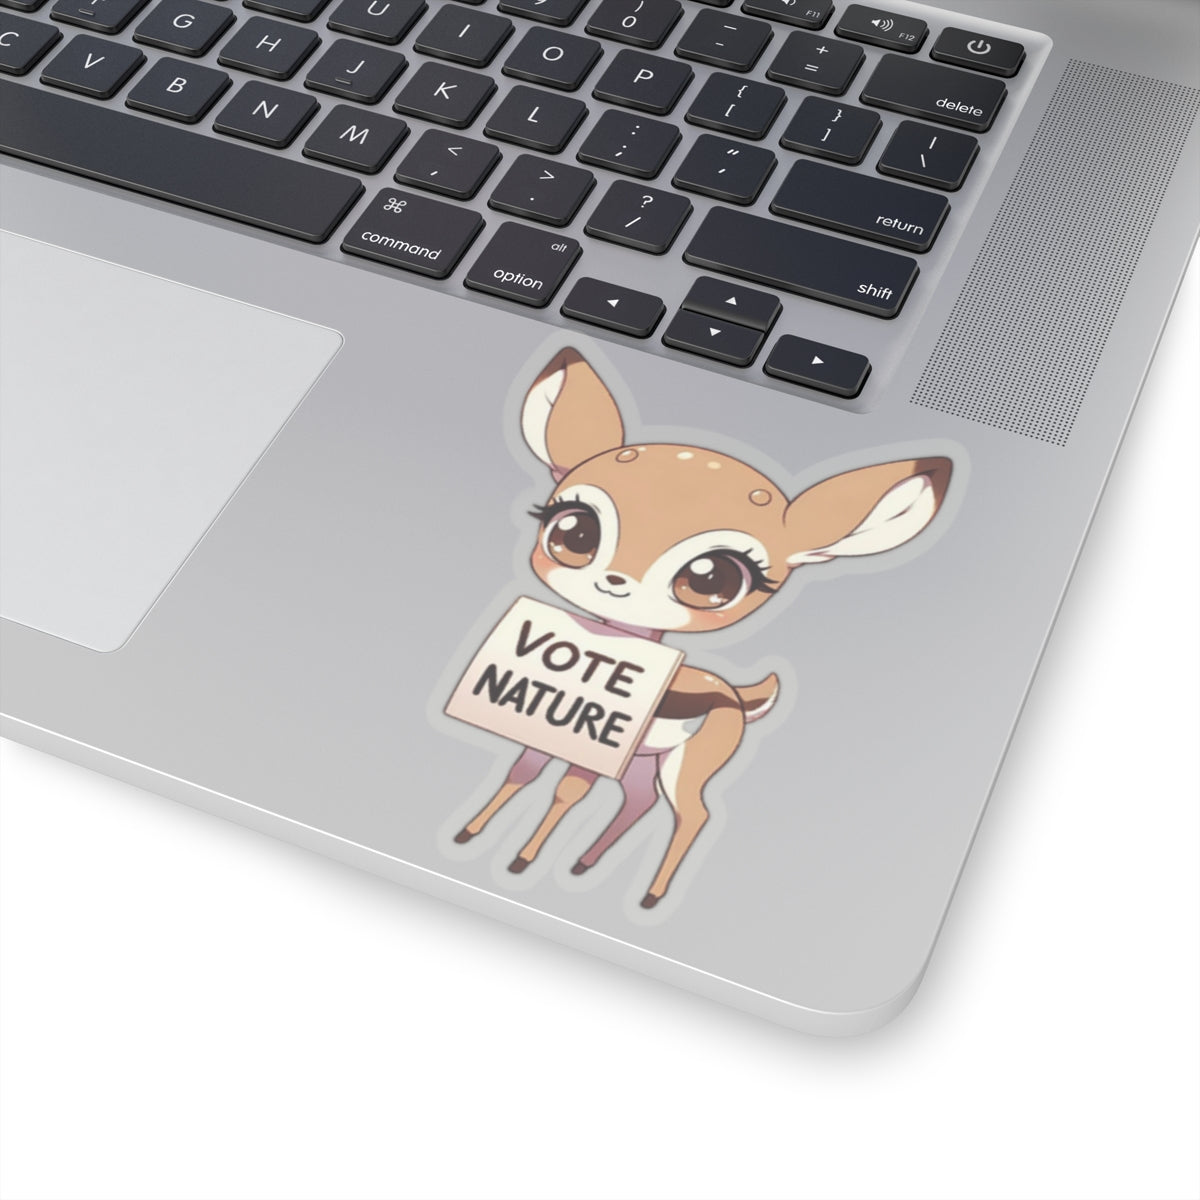 Inspirational Cute Fawn Statement vinyl Sticker: Vote Nature! for laptop, kindle, phone, ipad, instrument case, notebook, mood board